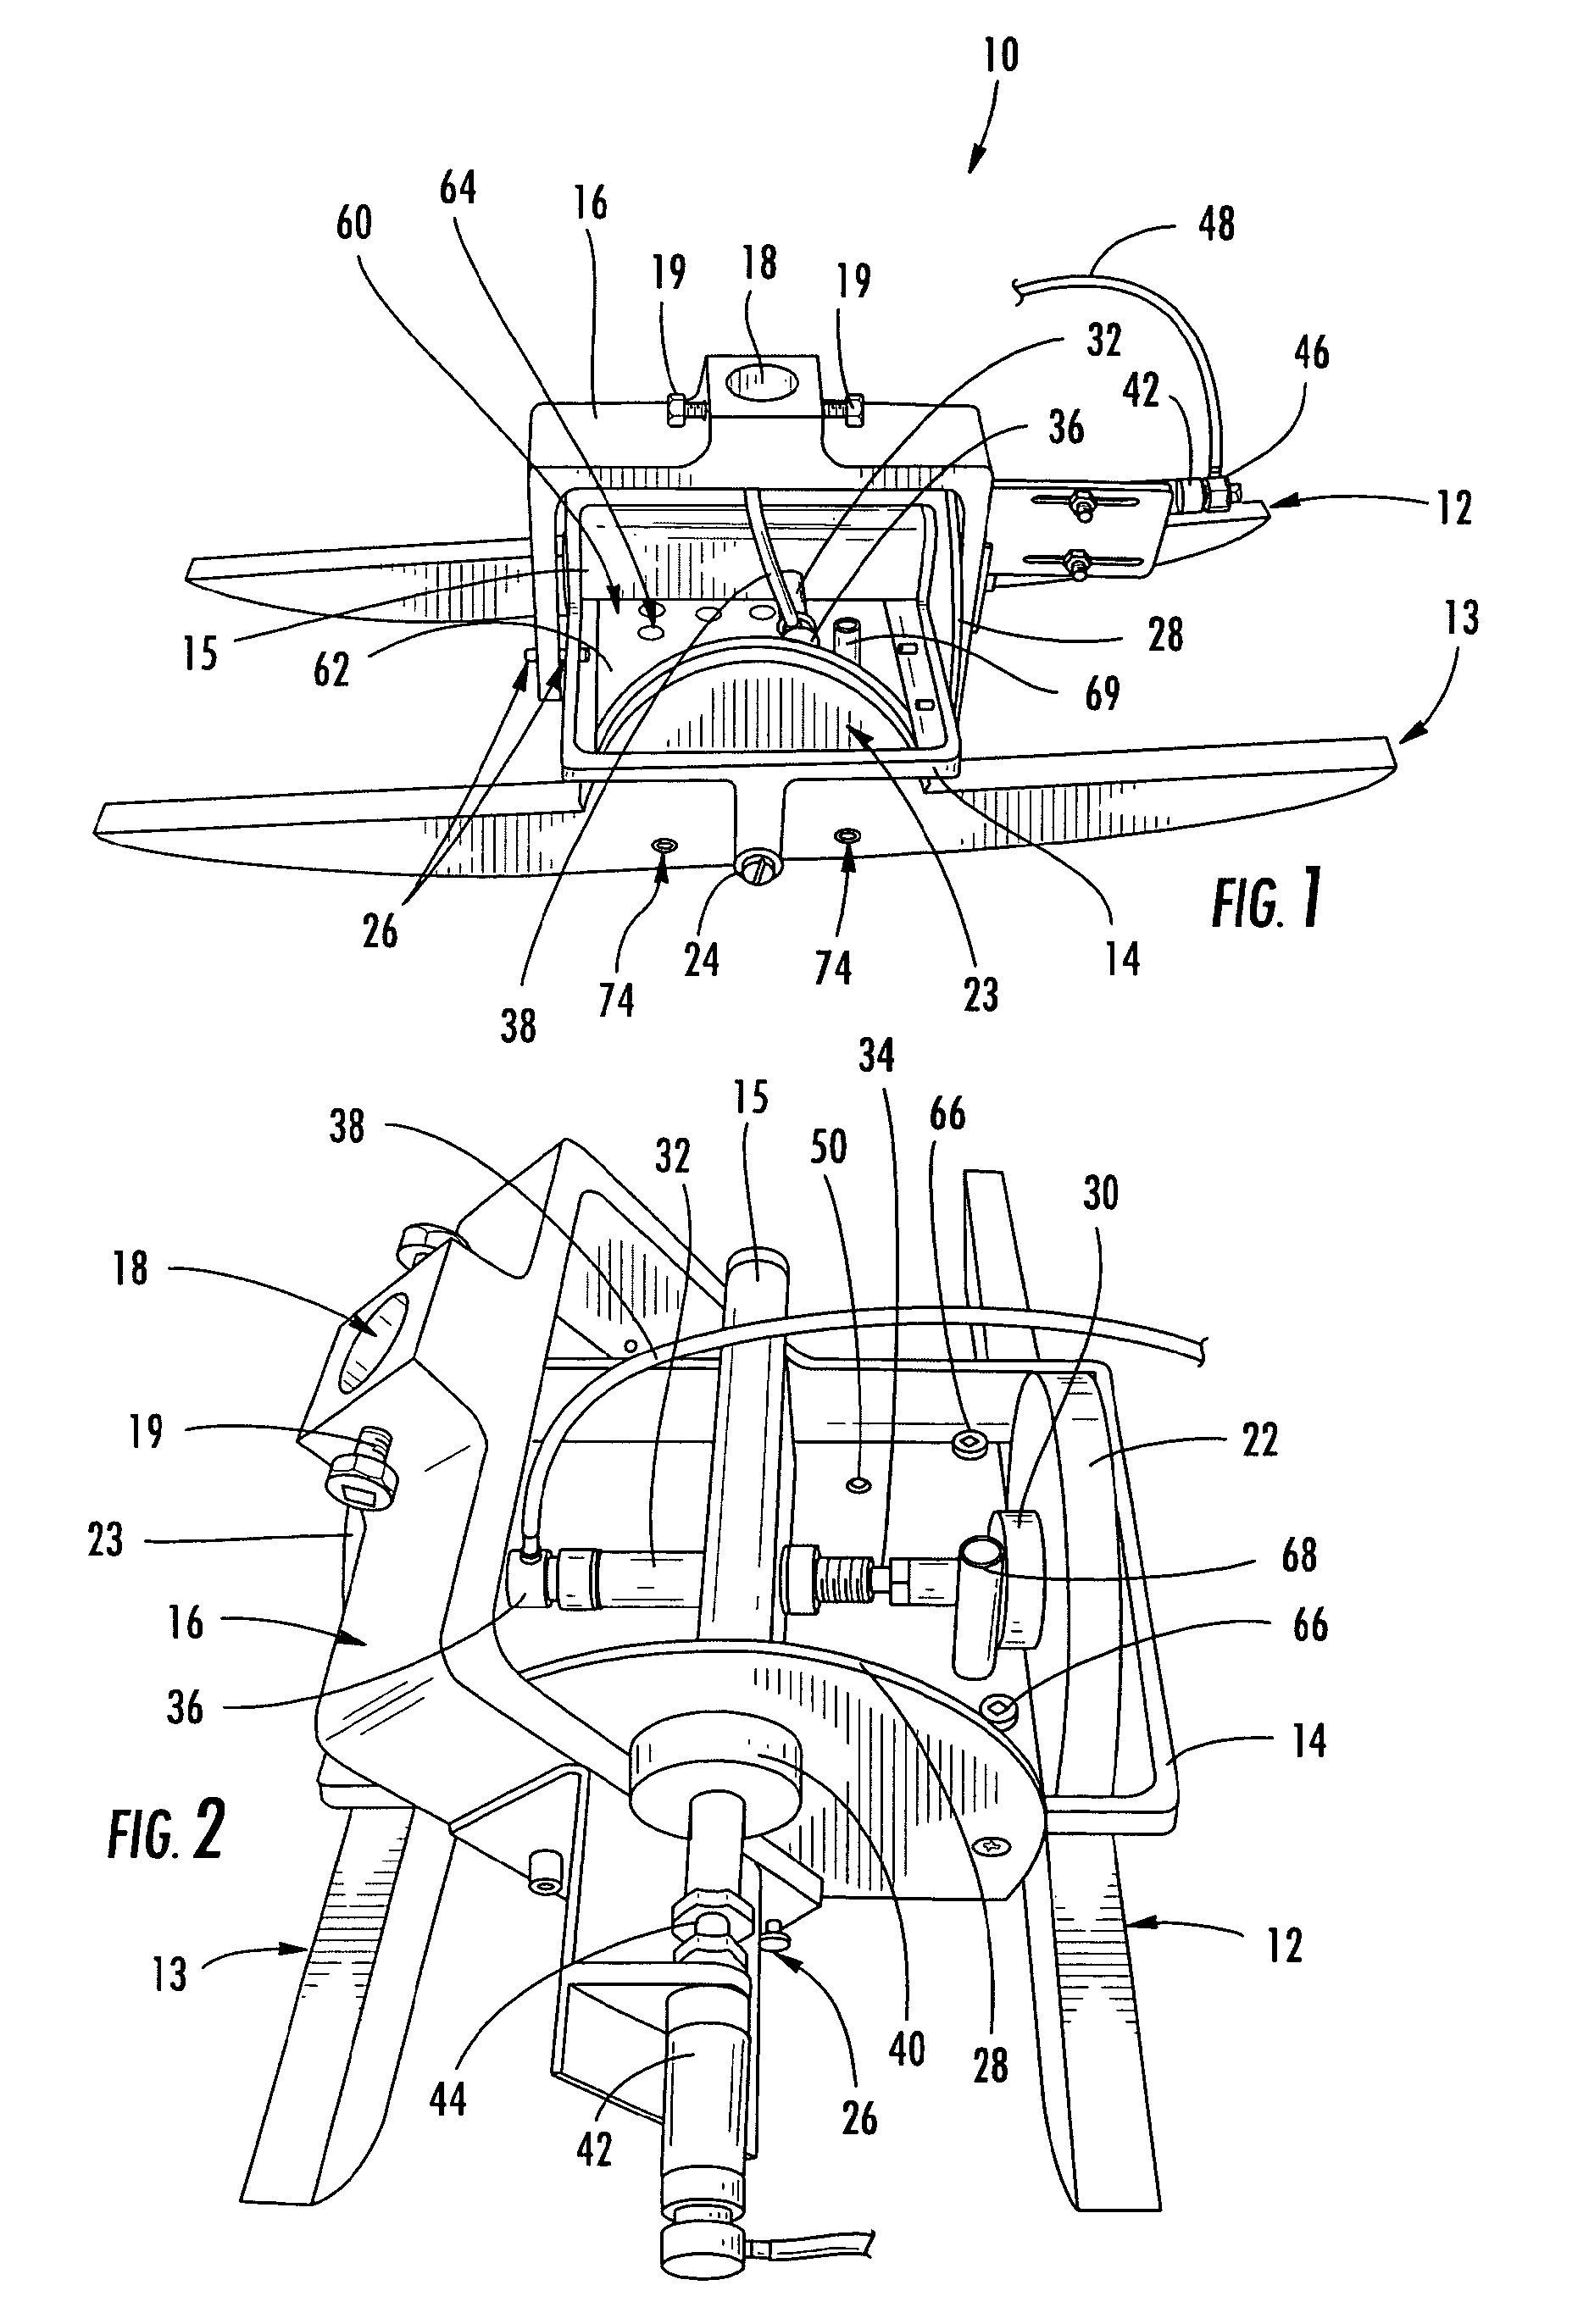 Multiple-frequency ultrasonic test probe, inspection system, and inspection method